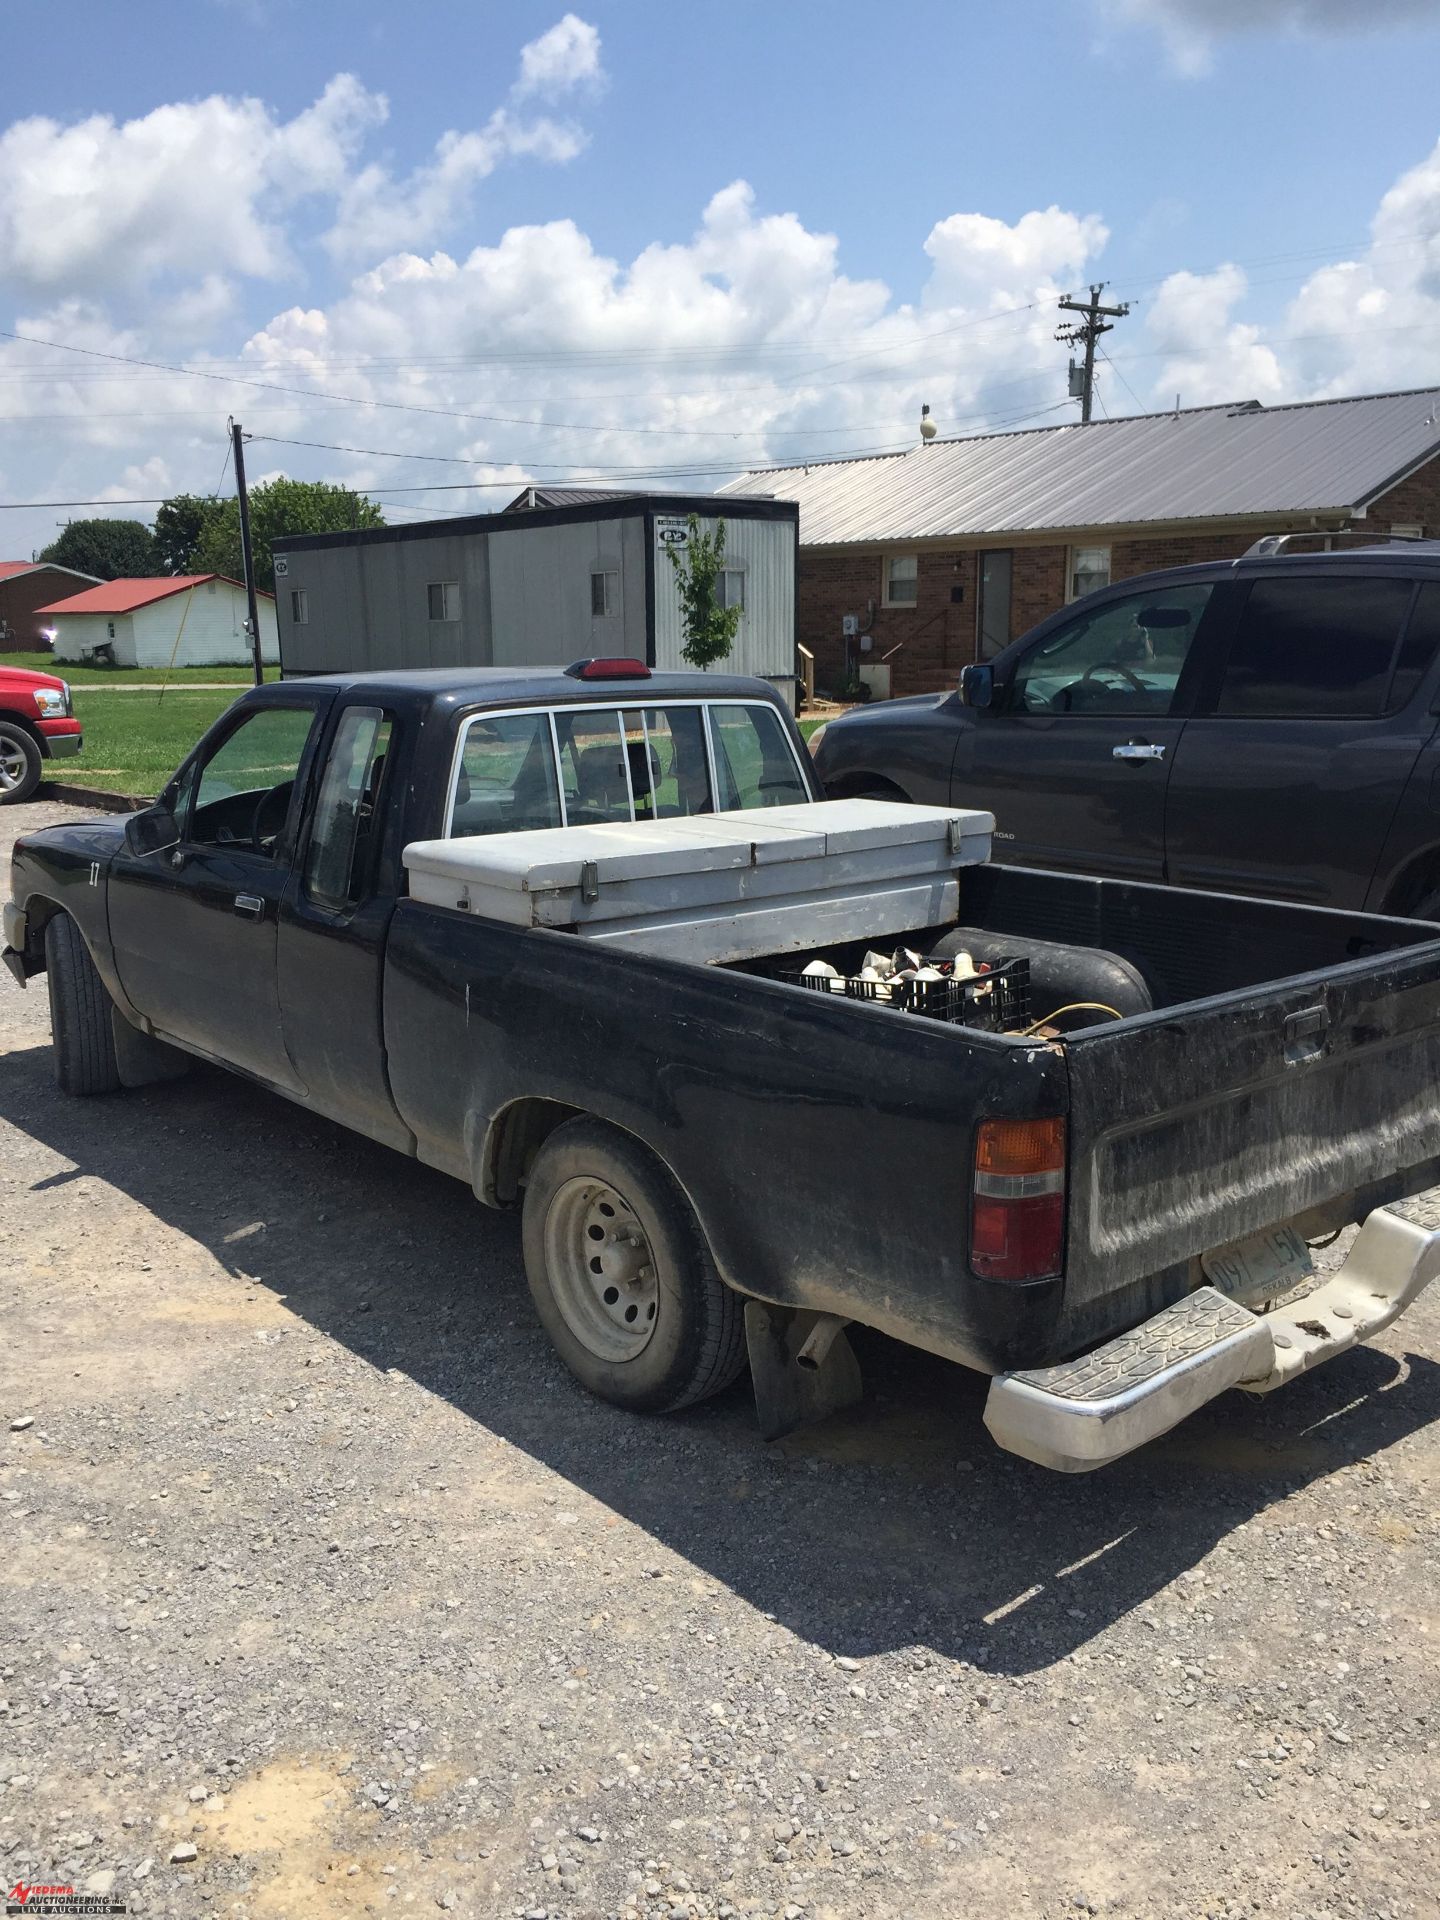 1994 TOYOTA EXTENDED CAB PICKUP TRUCK, LONG BOX, 4-CYLINDER GAS ENGINE, AUTOMATIC TRANS, ASSORTED - Image 4 of 6